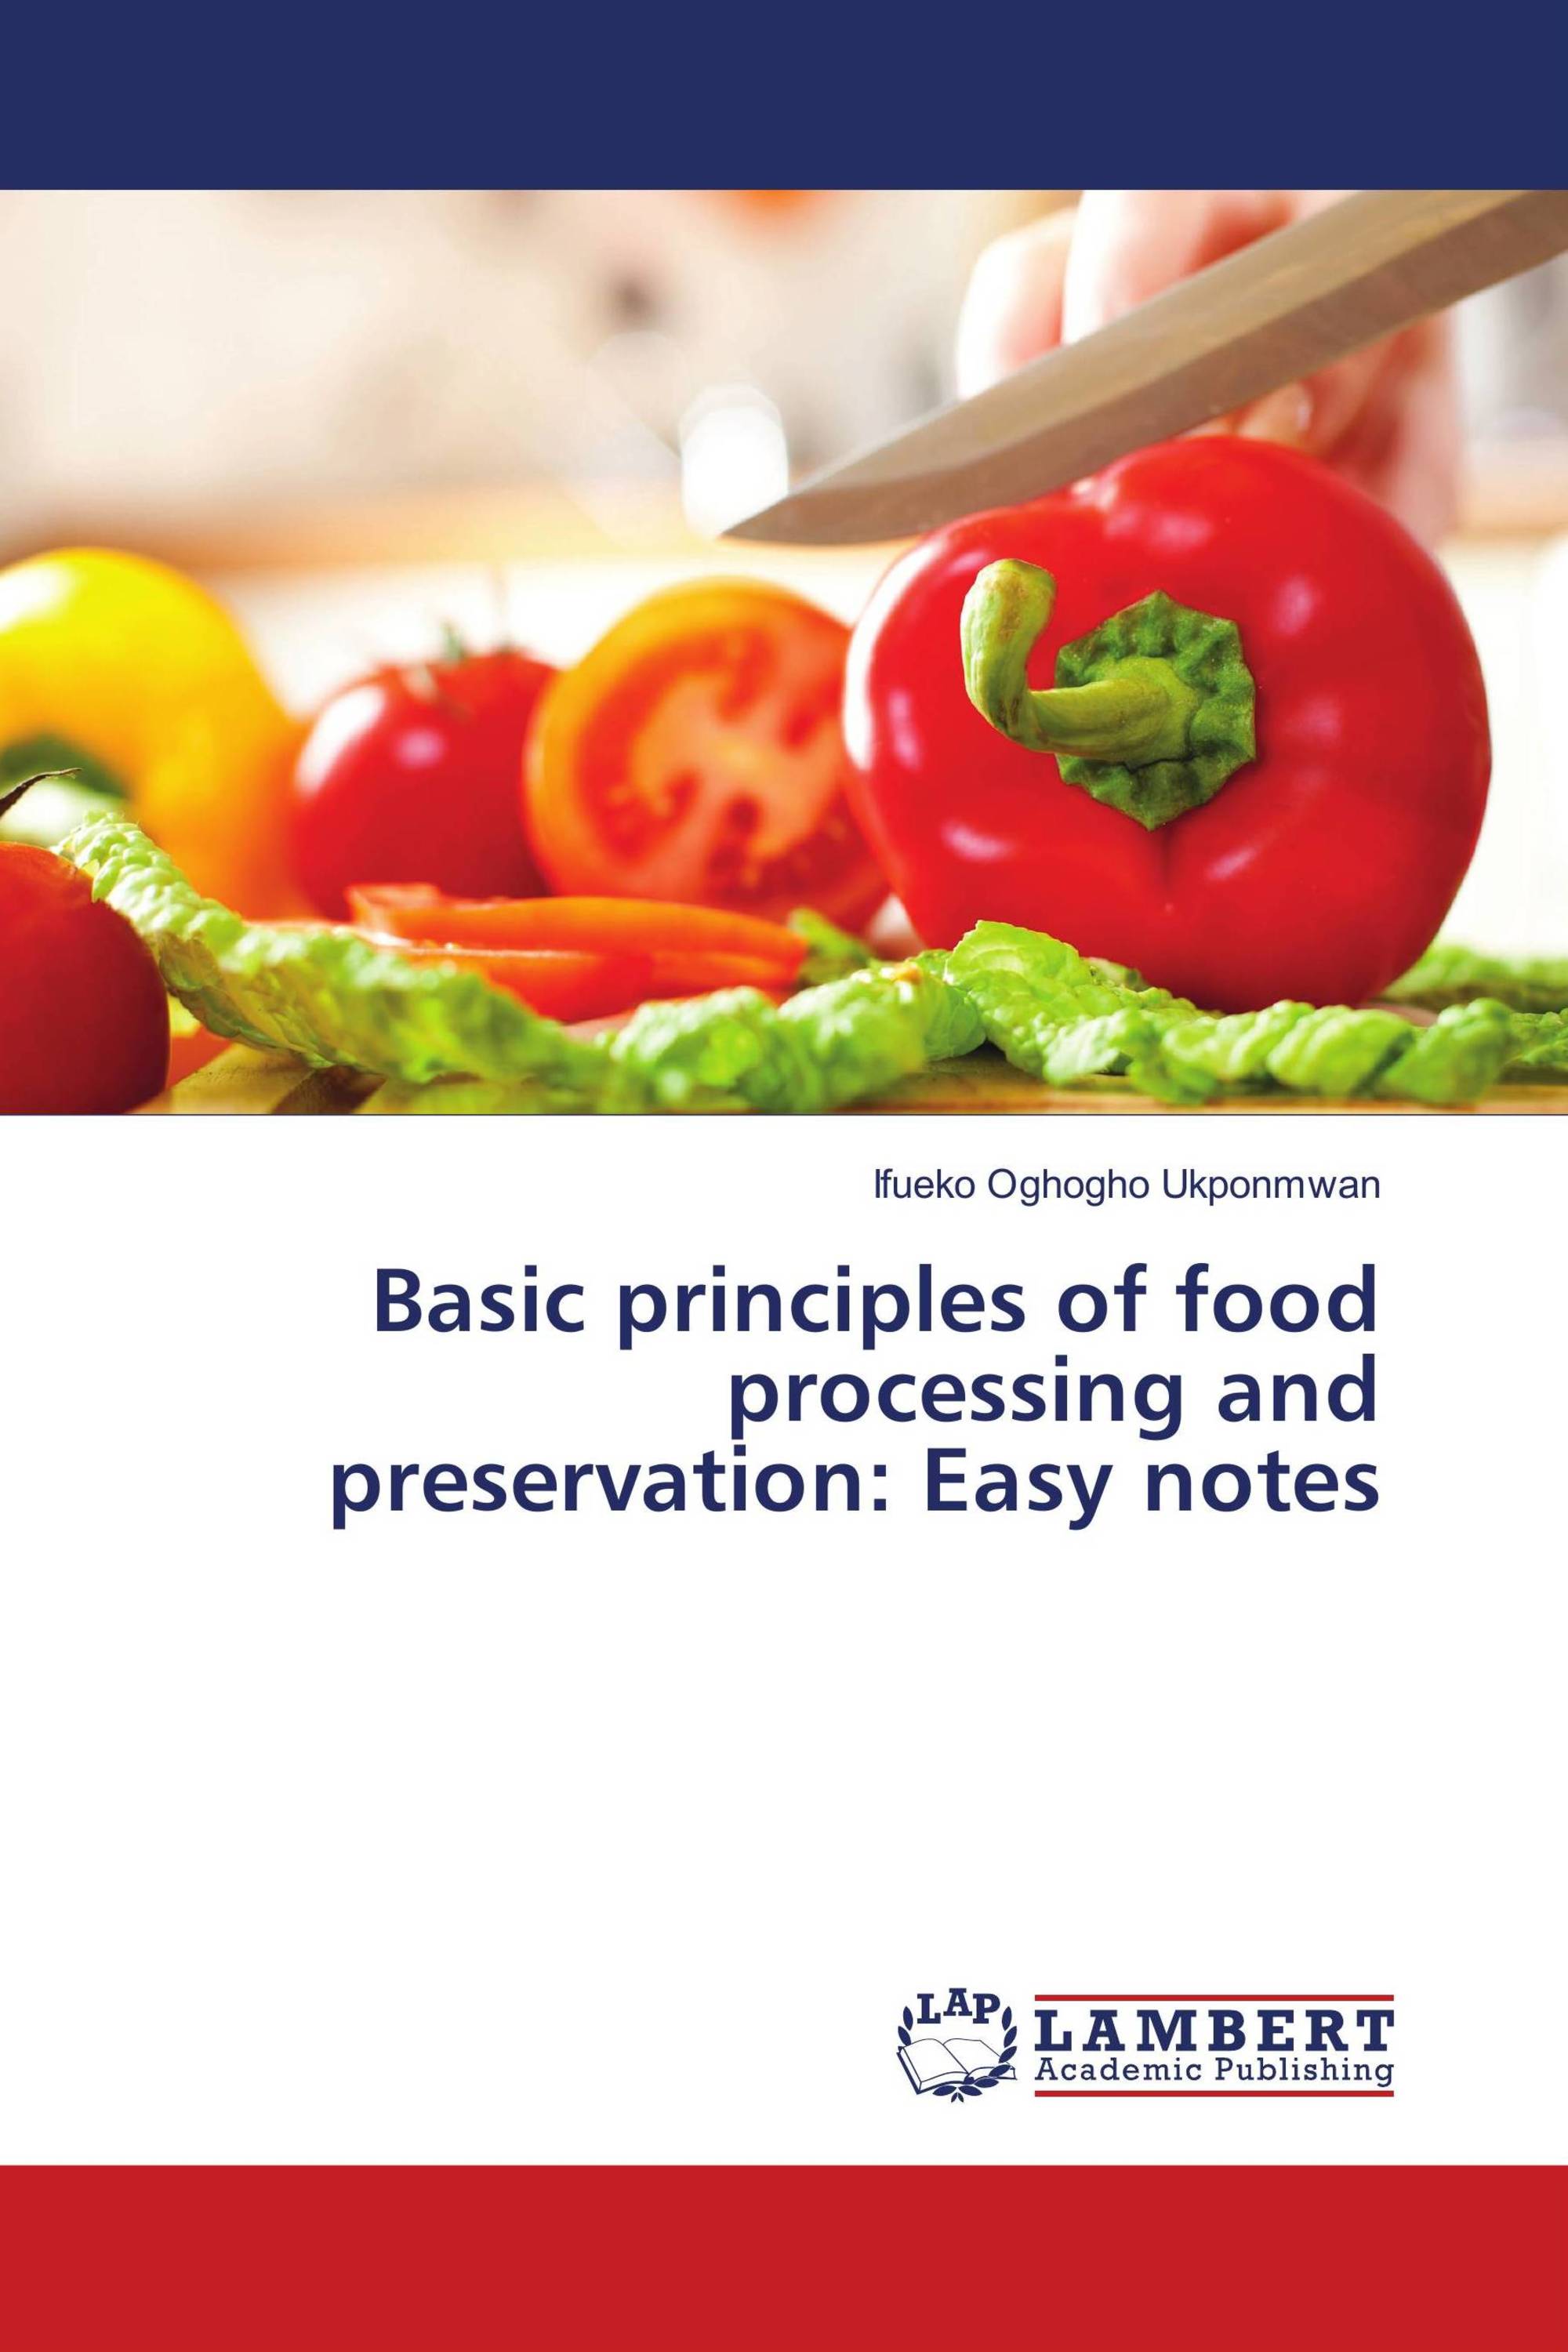 importance of food processing essay